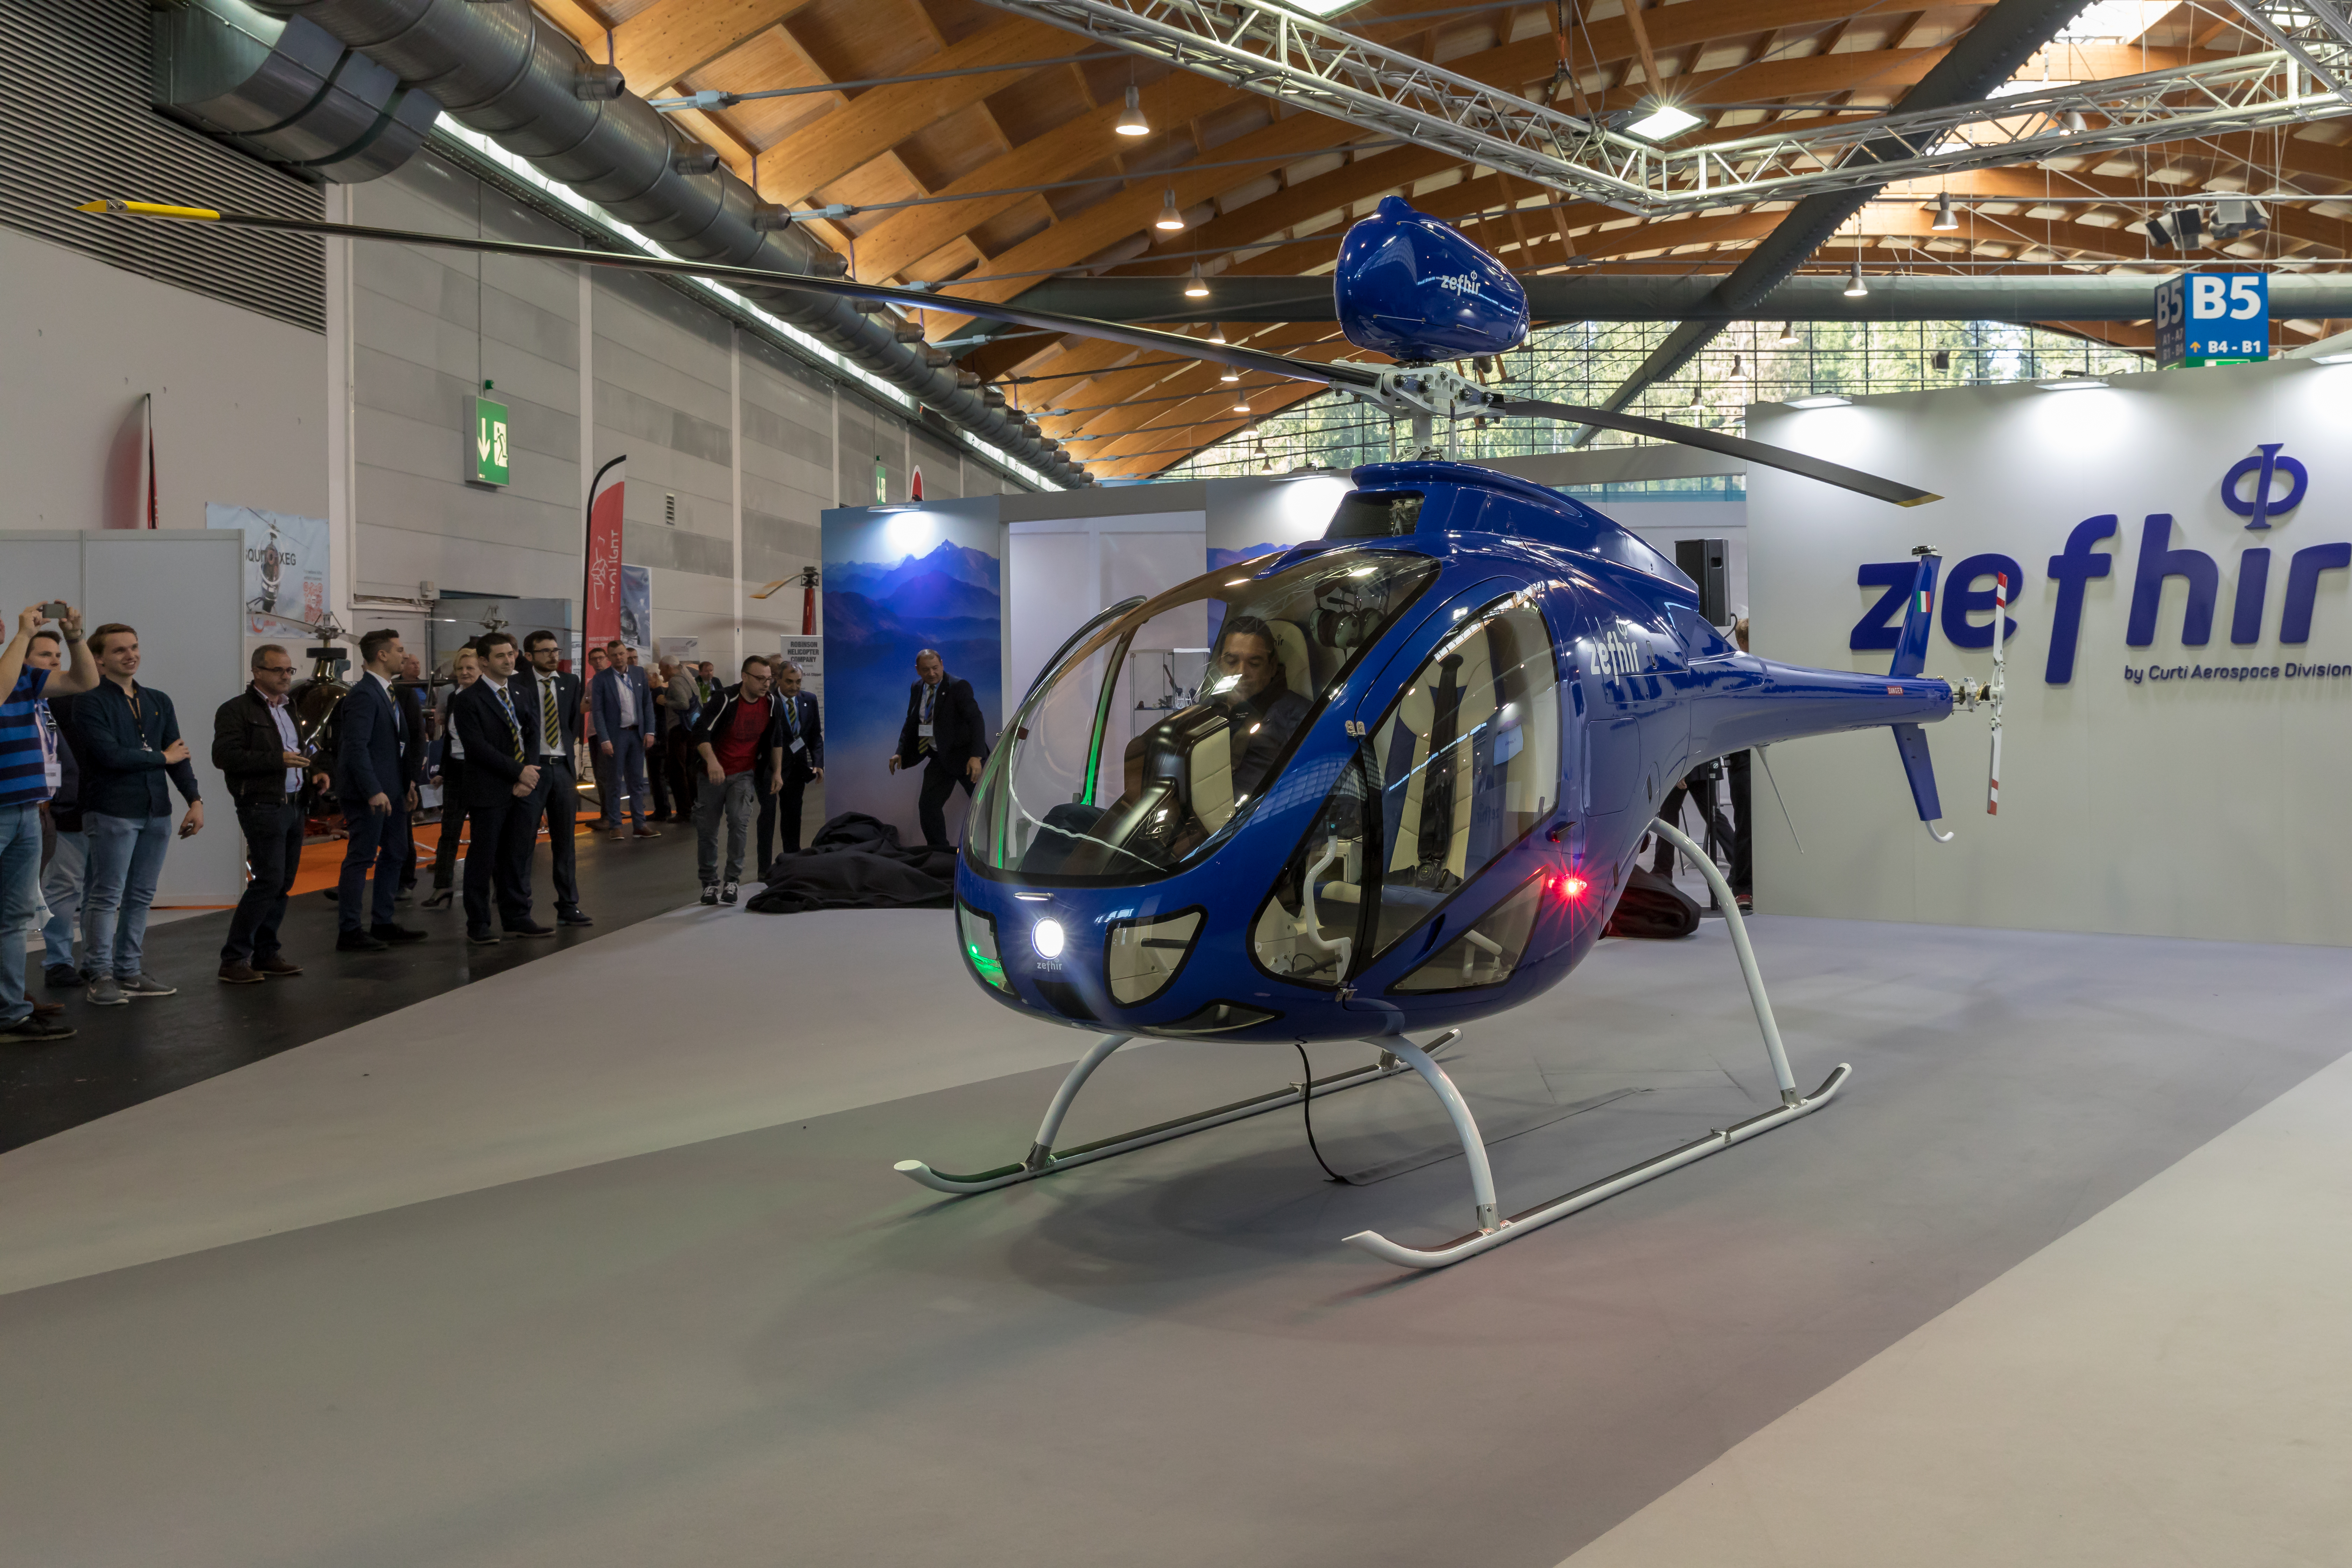 Factors to Consider When Choosing a Private Helicopter